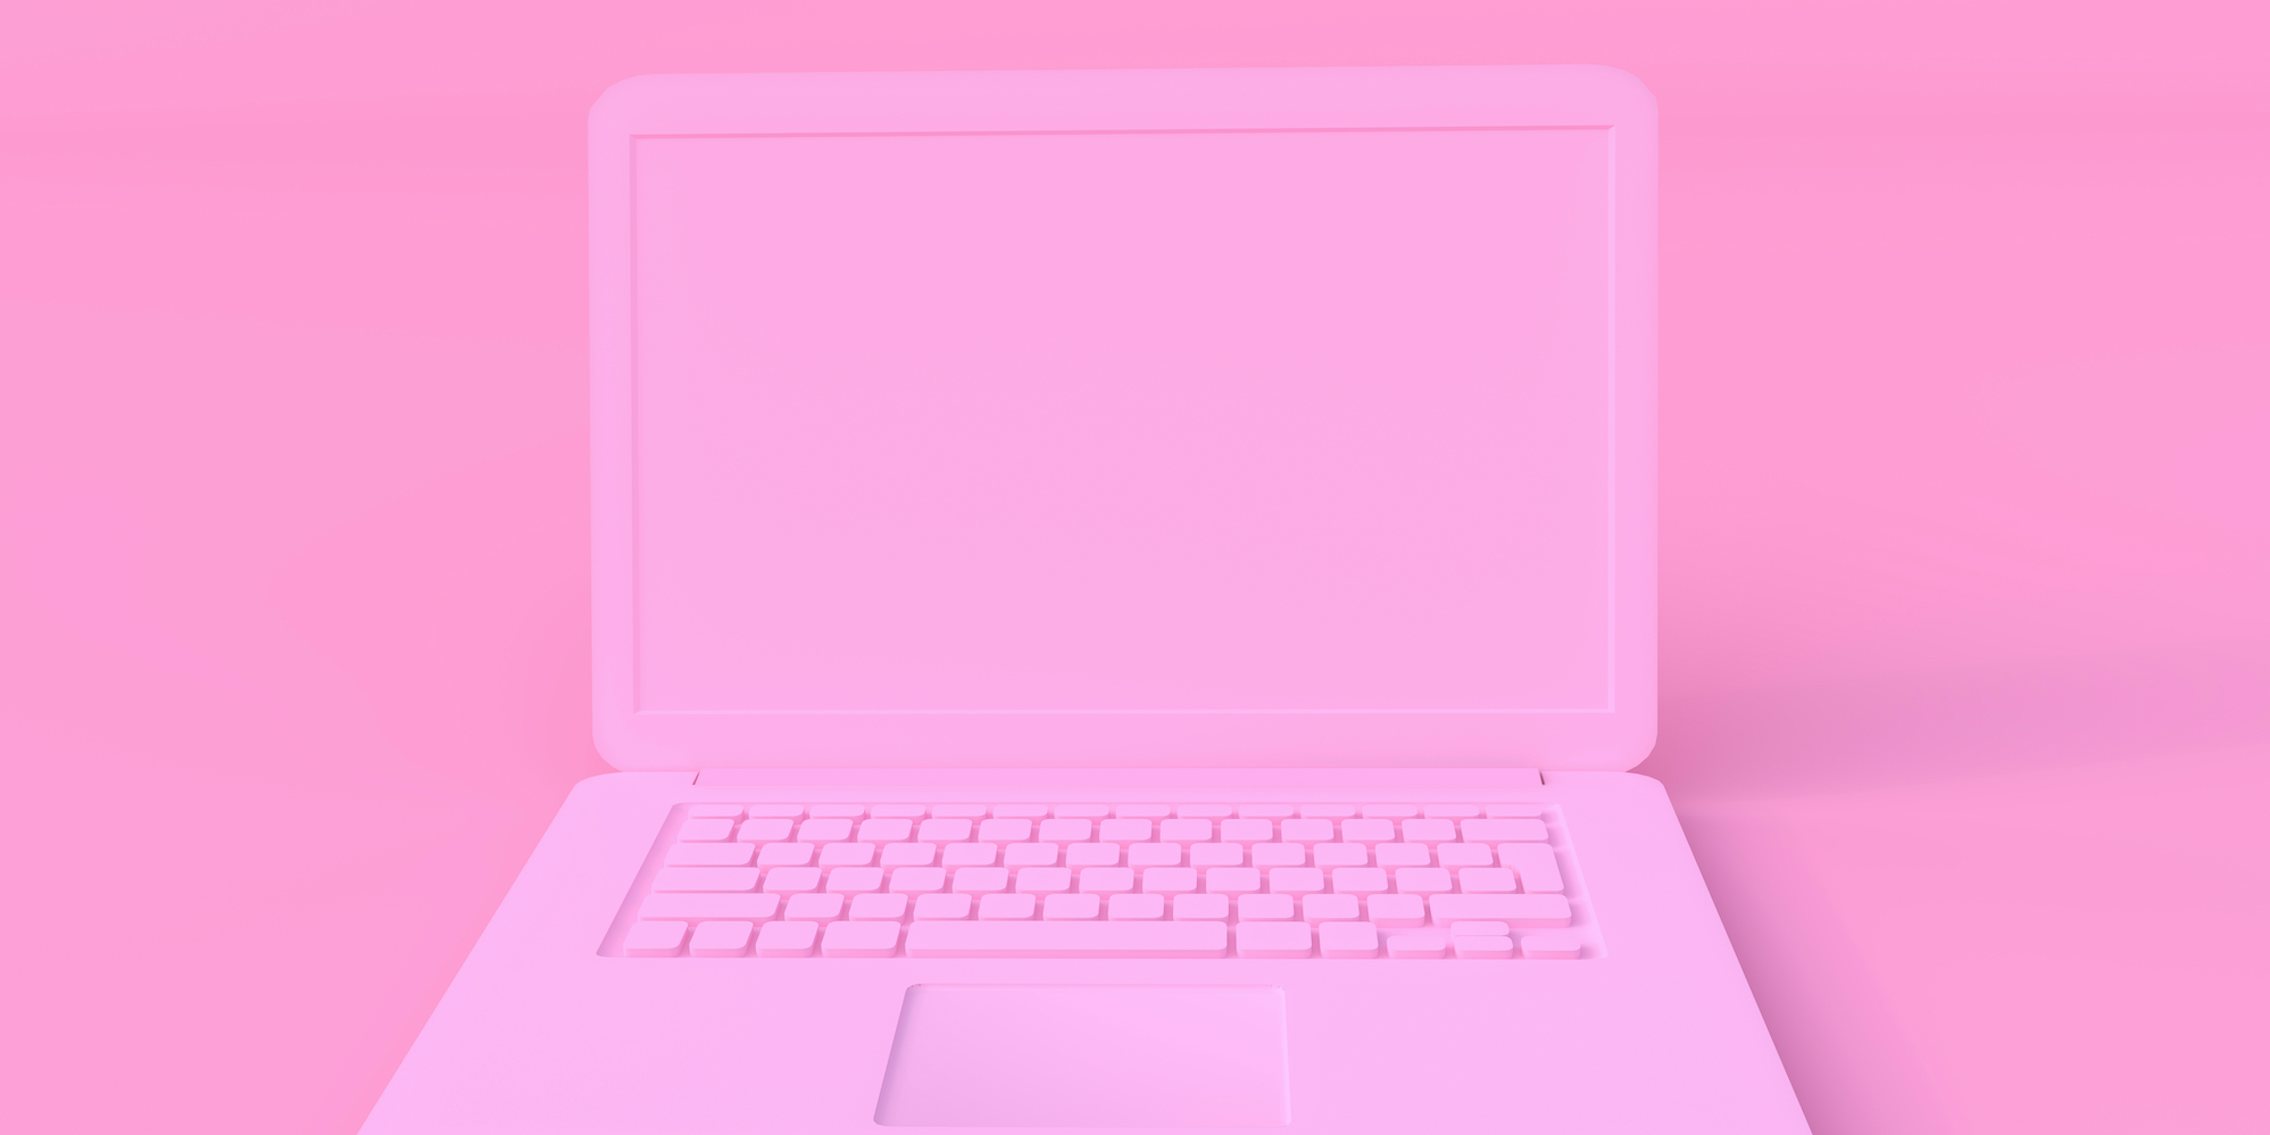 a pink latop on a pink background with pink keys and a pink screen